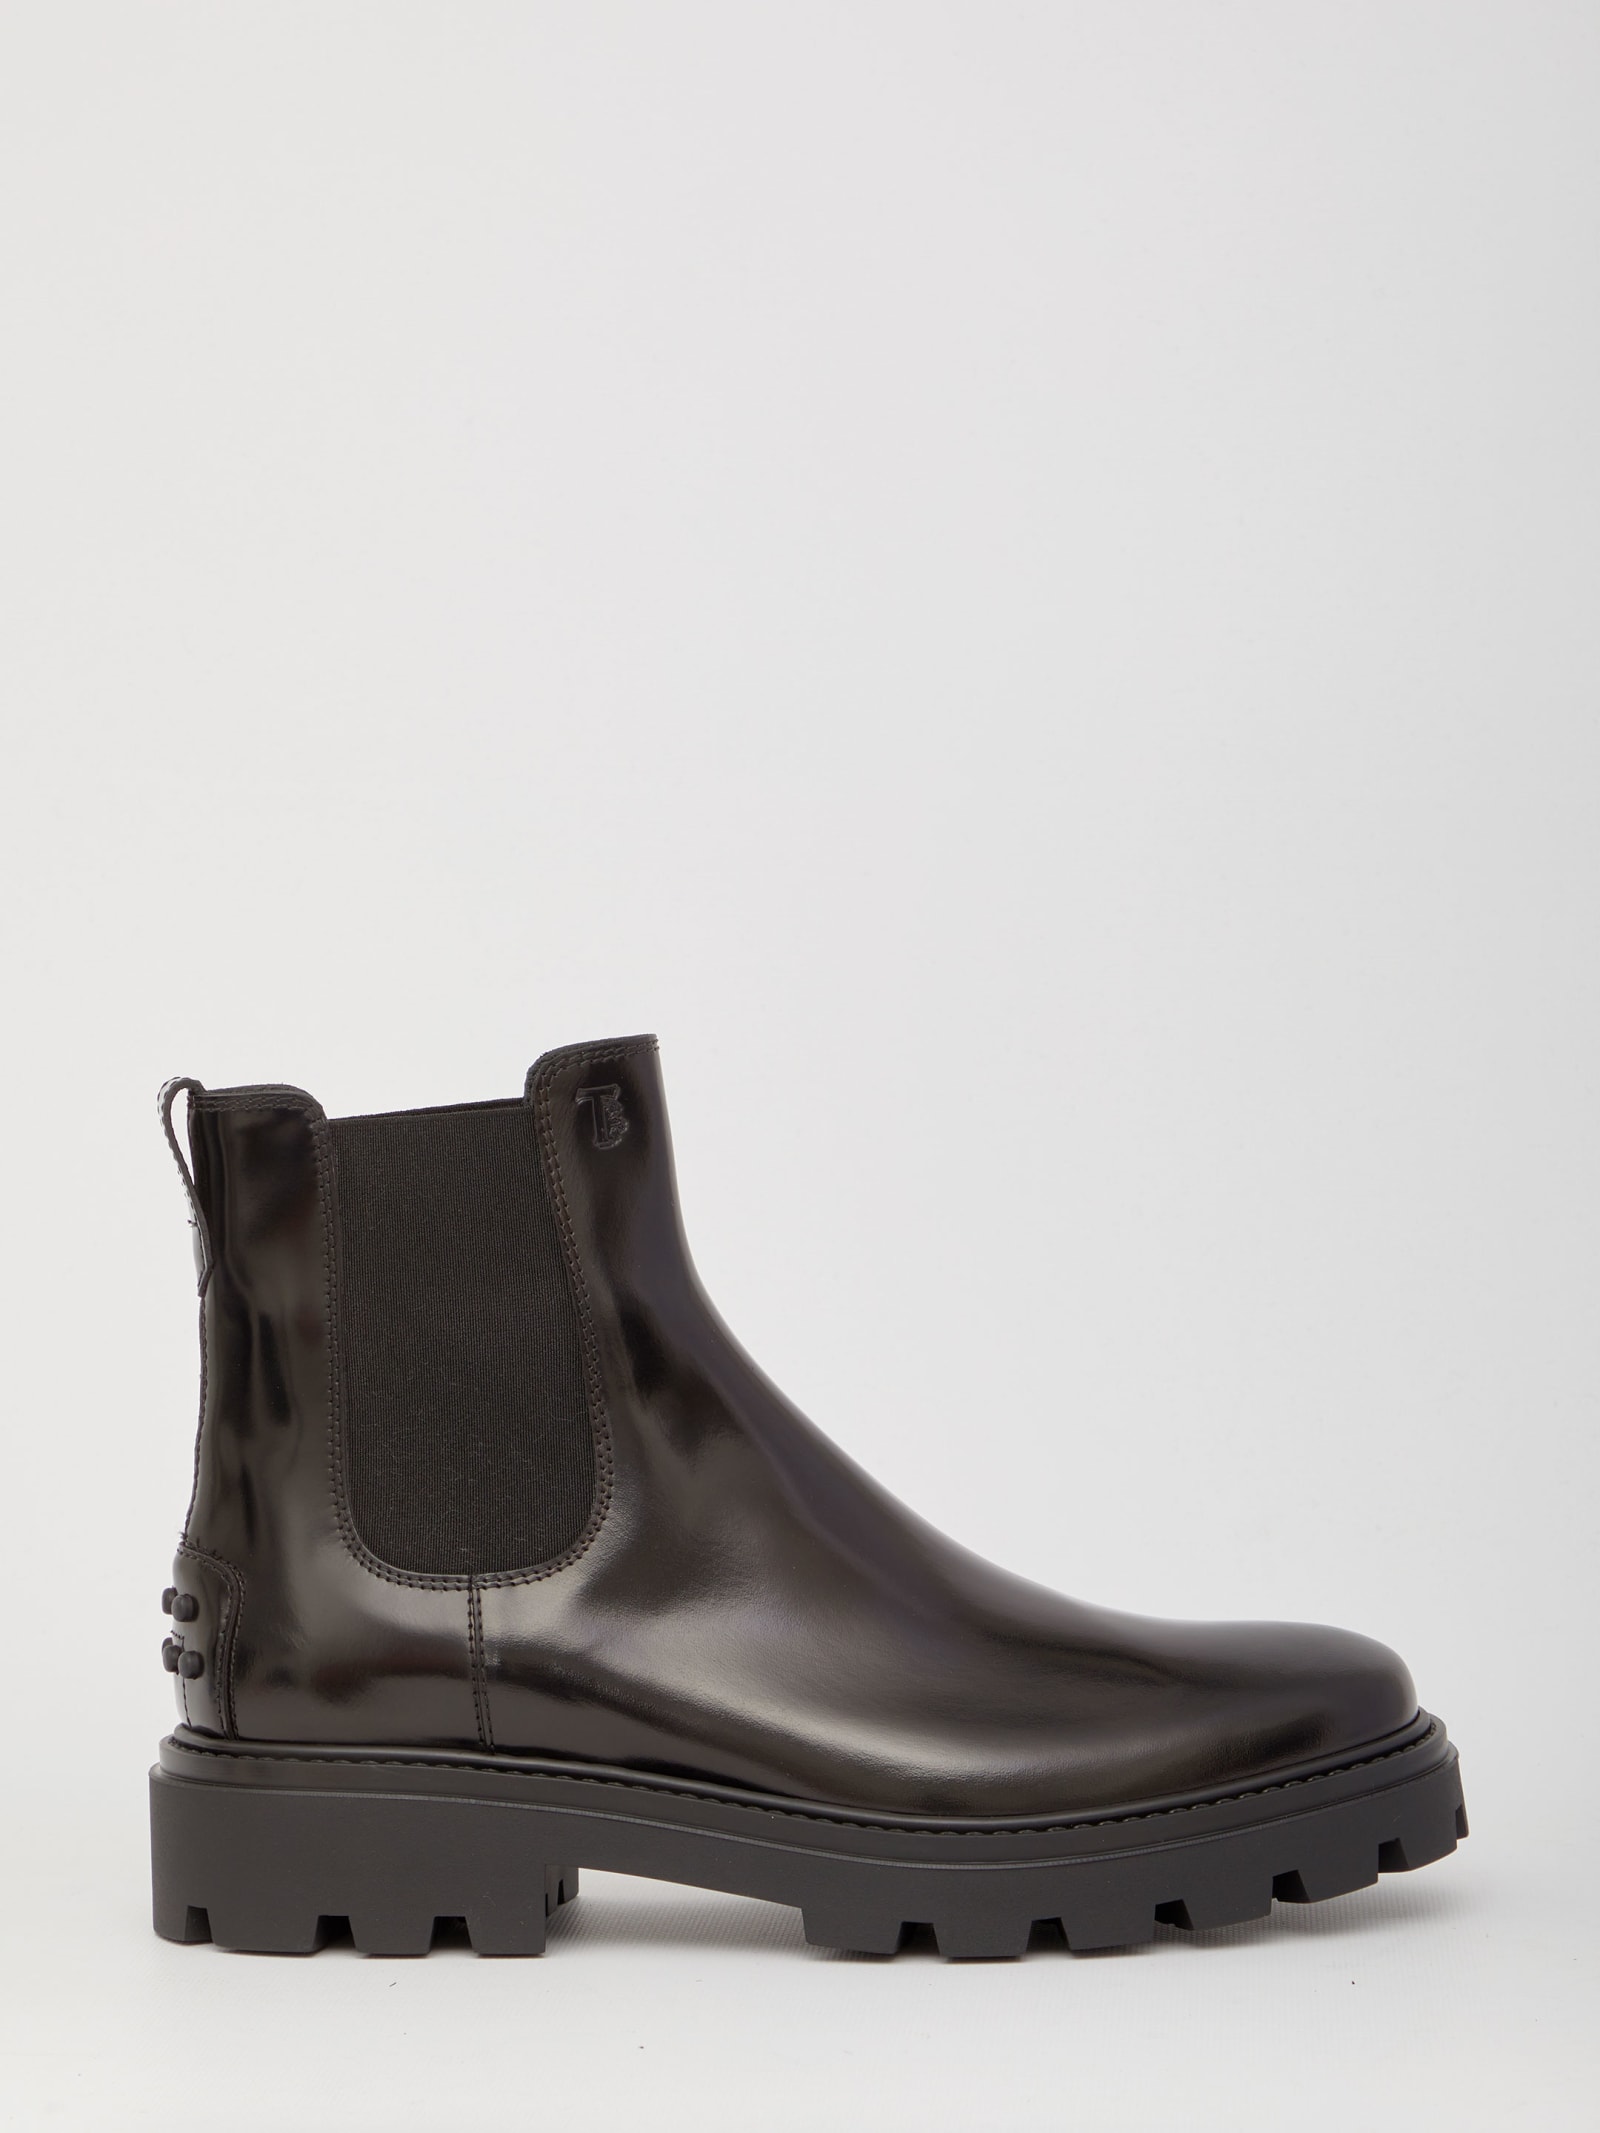 Tod's Black Leather Ankle Boots